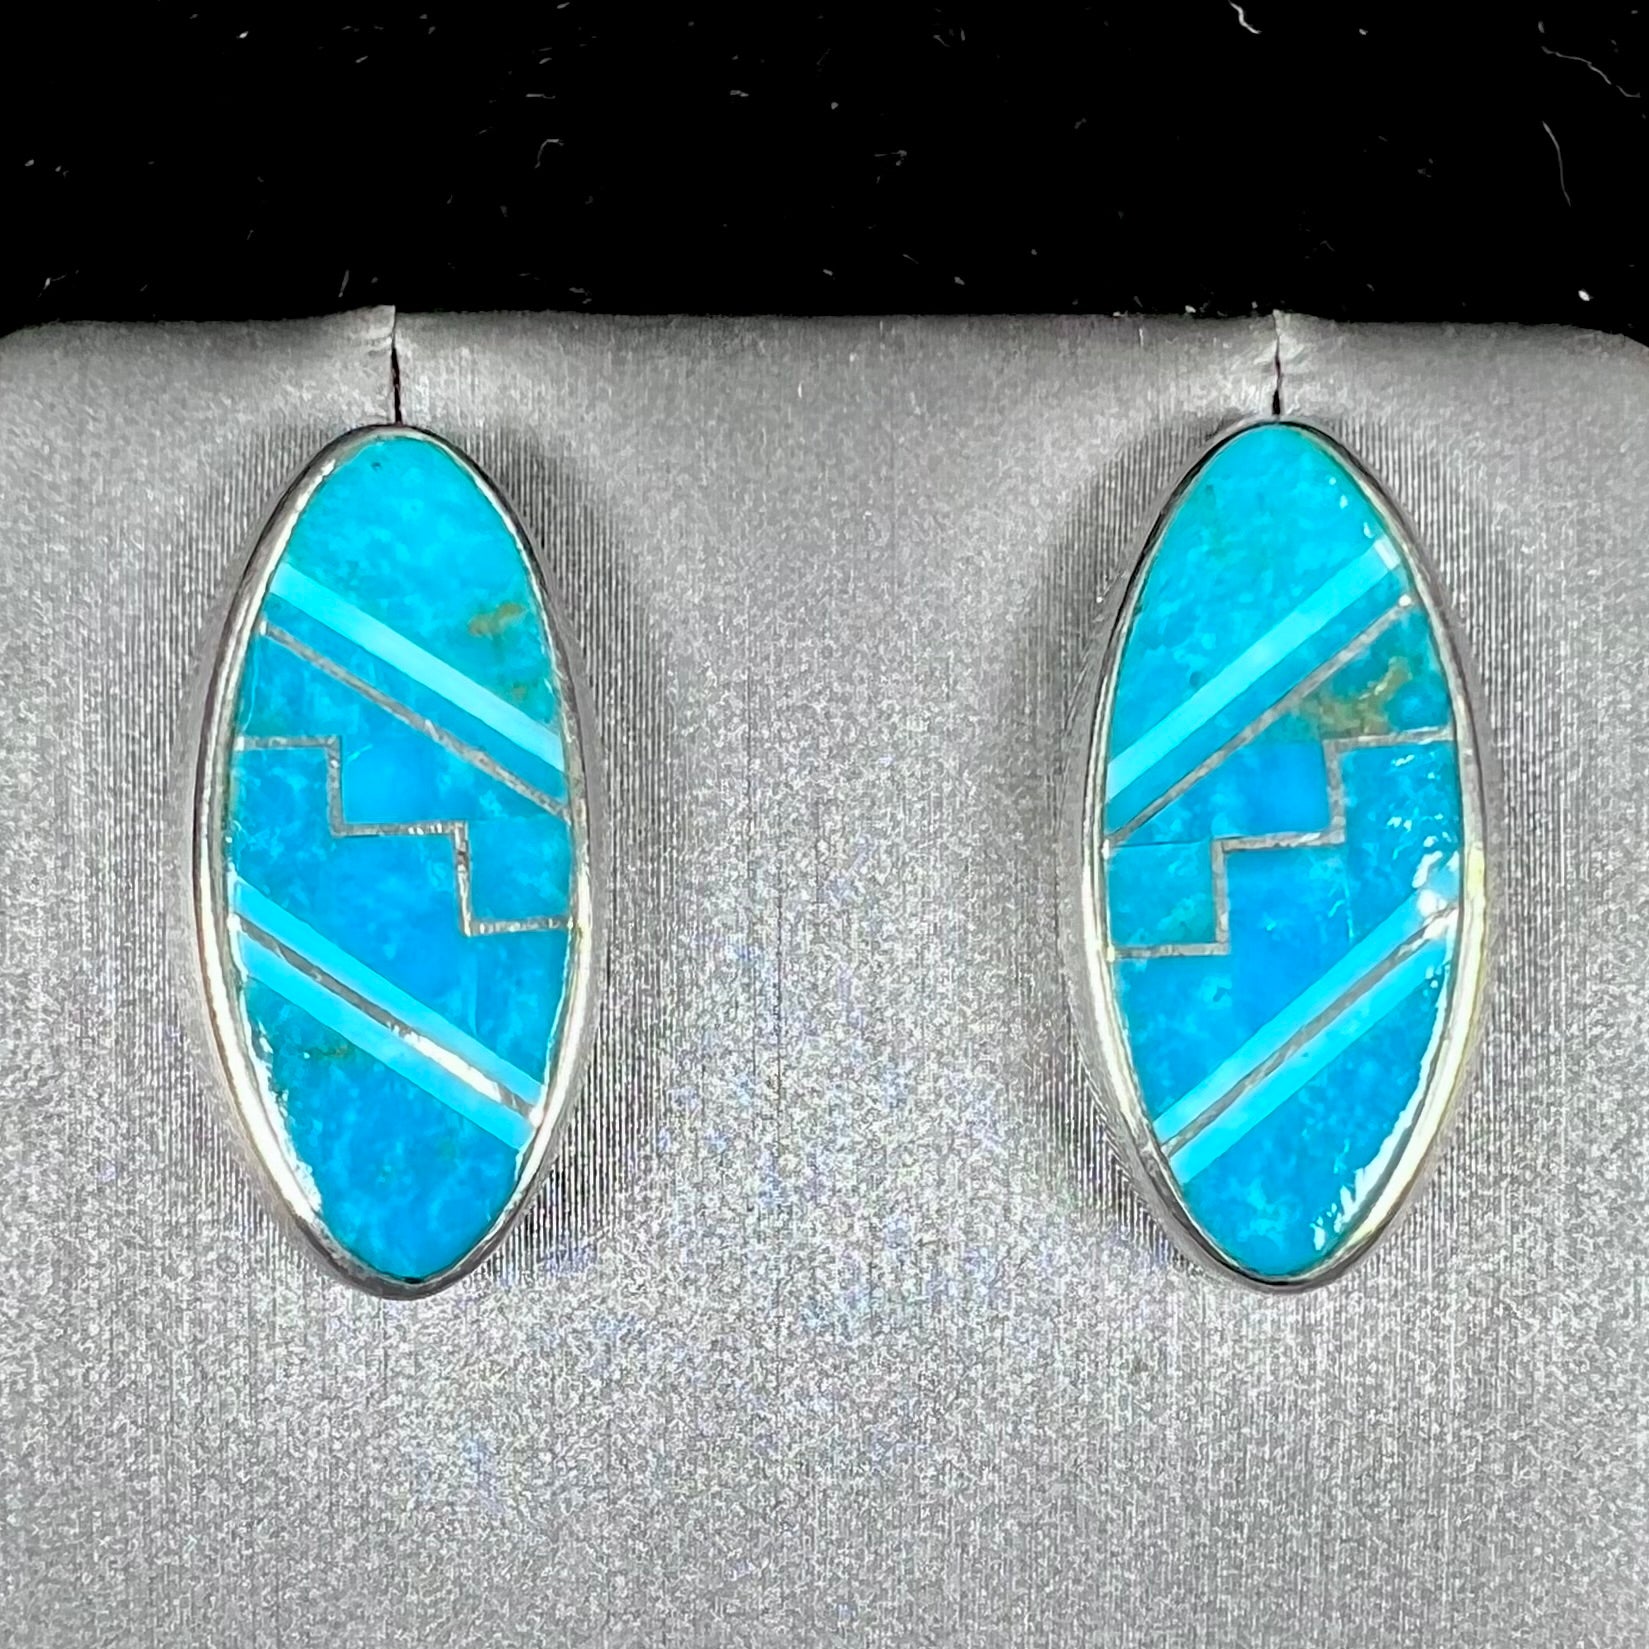 A pair of sterling silver turquoise inlay earrings, handmade by the Zuni artist.